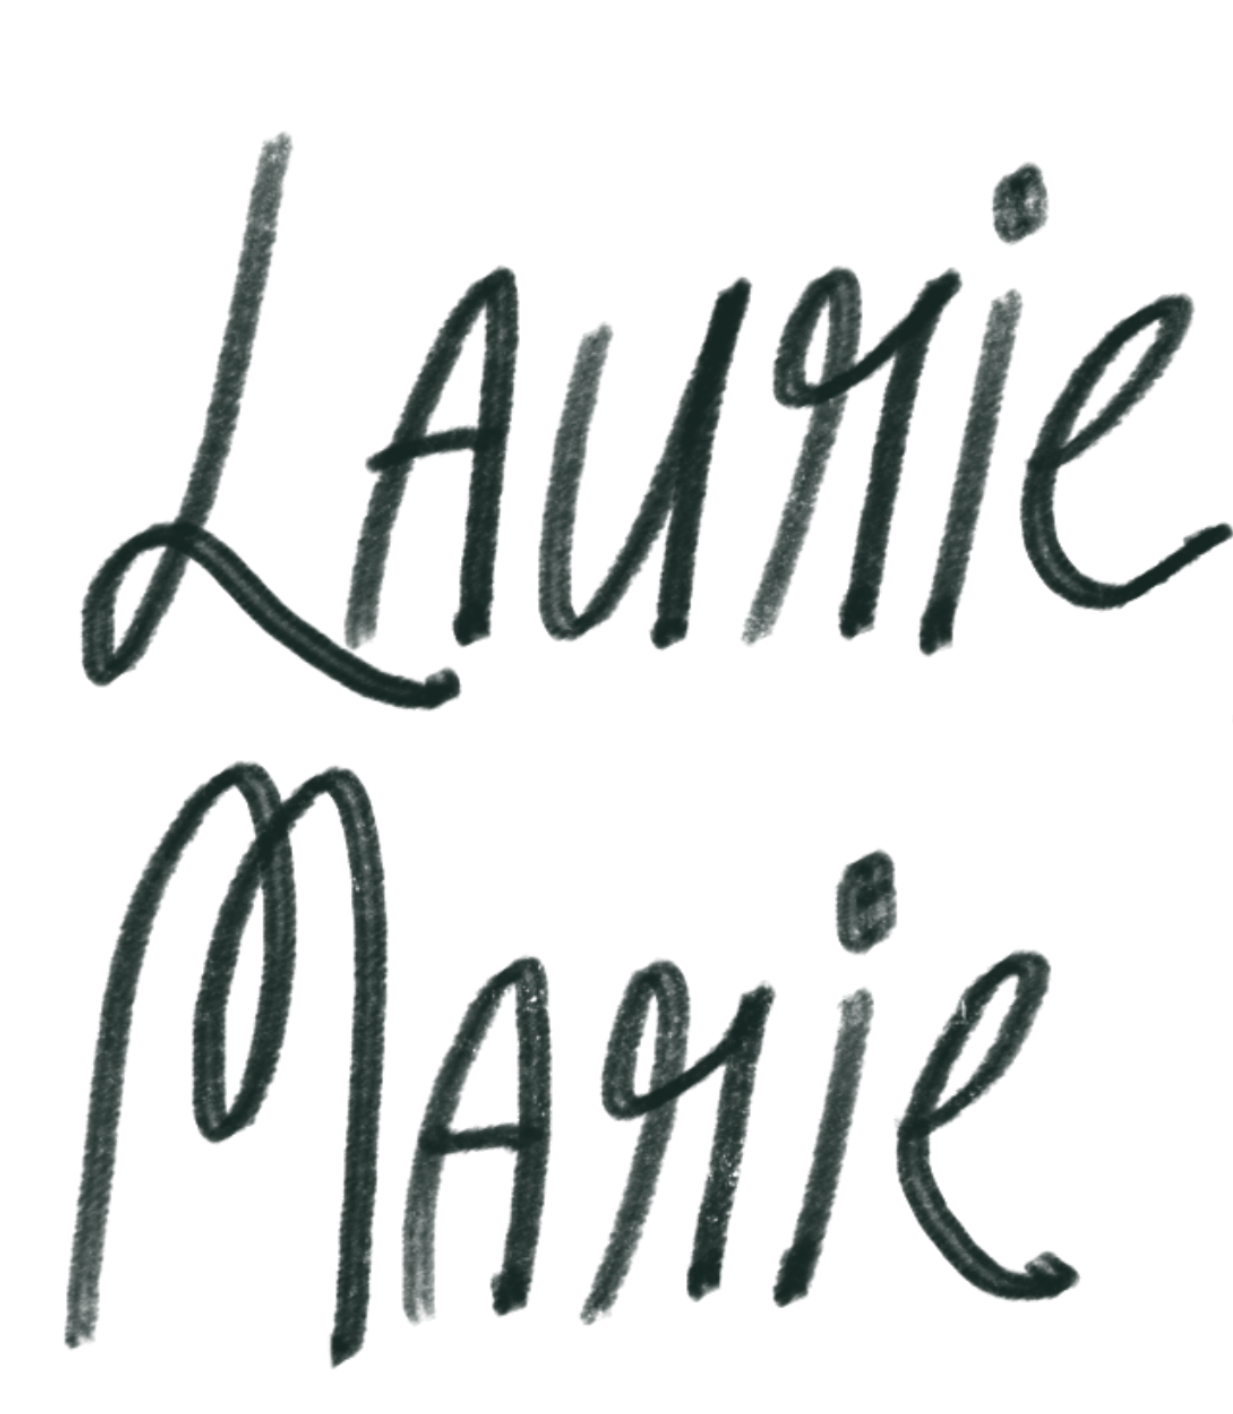 laurie marie roberts